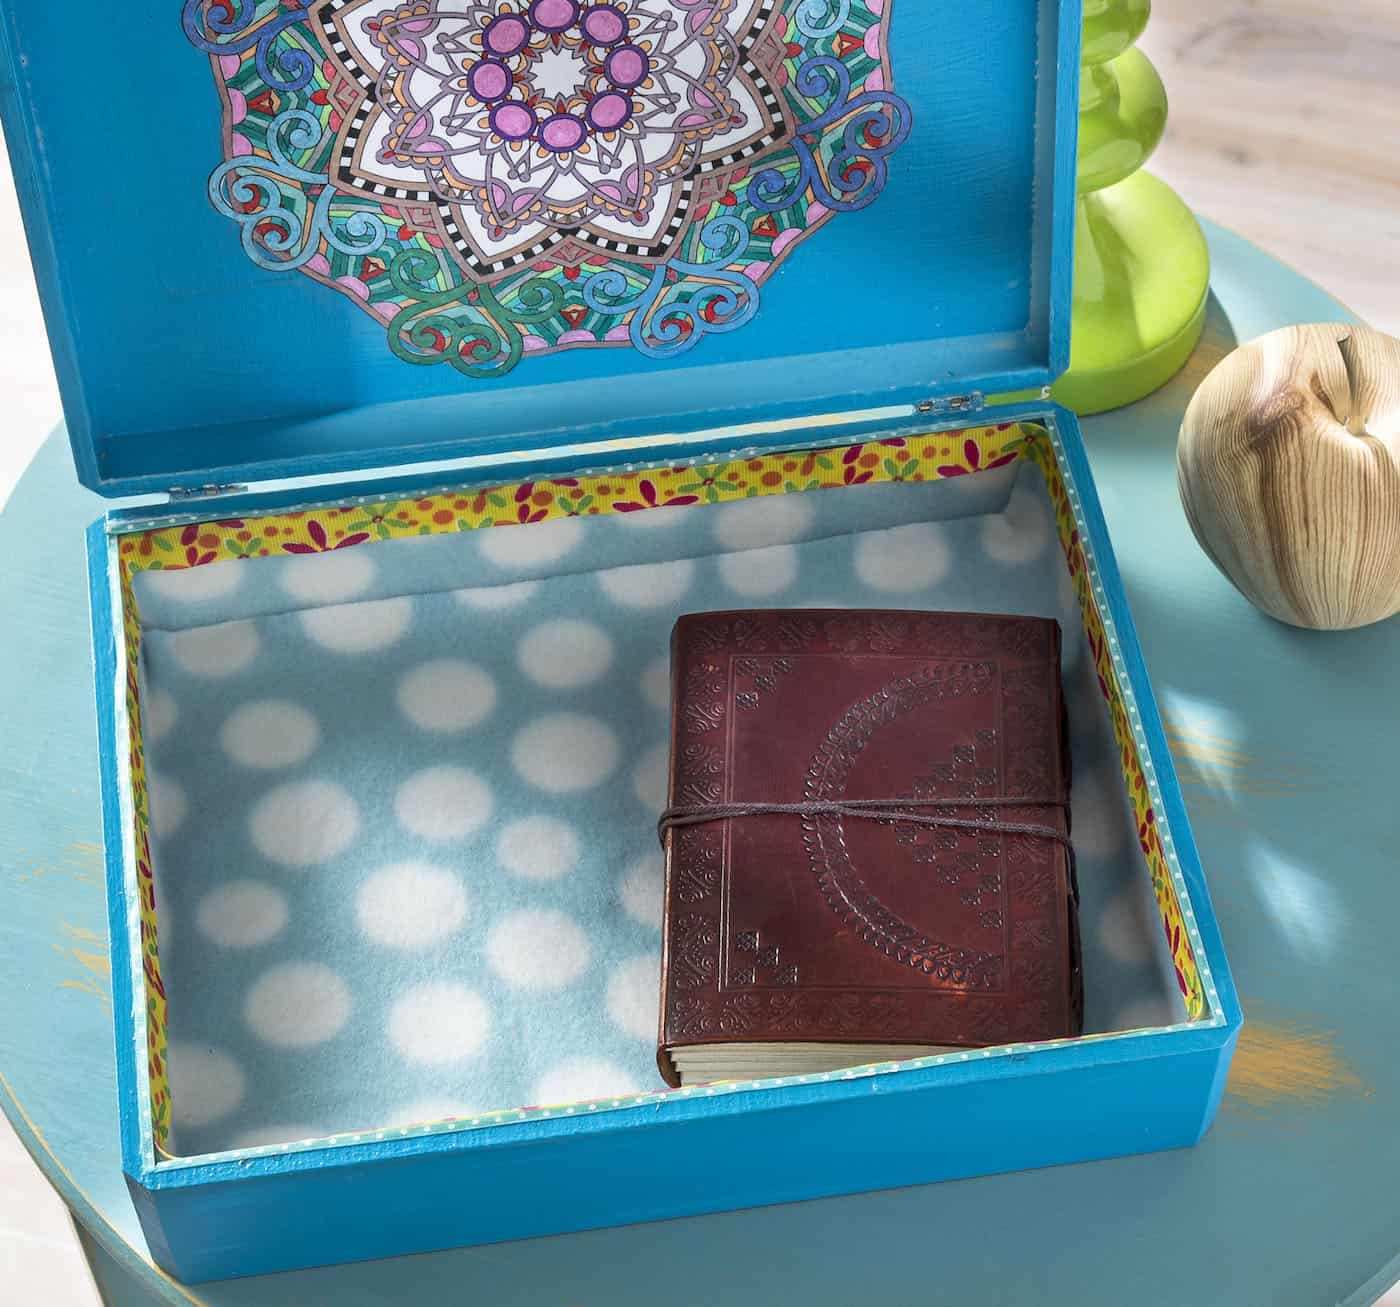 How to decorate boxes with paint and Mod Podge